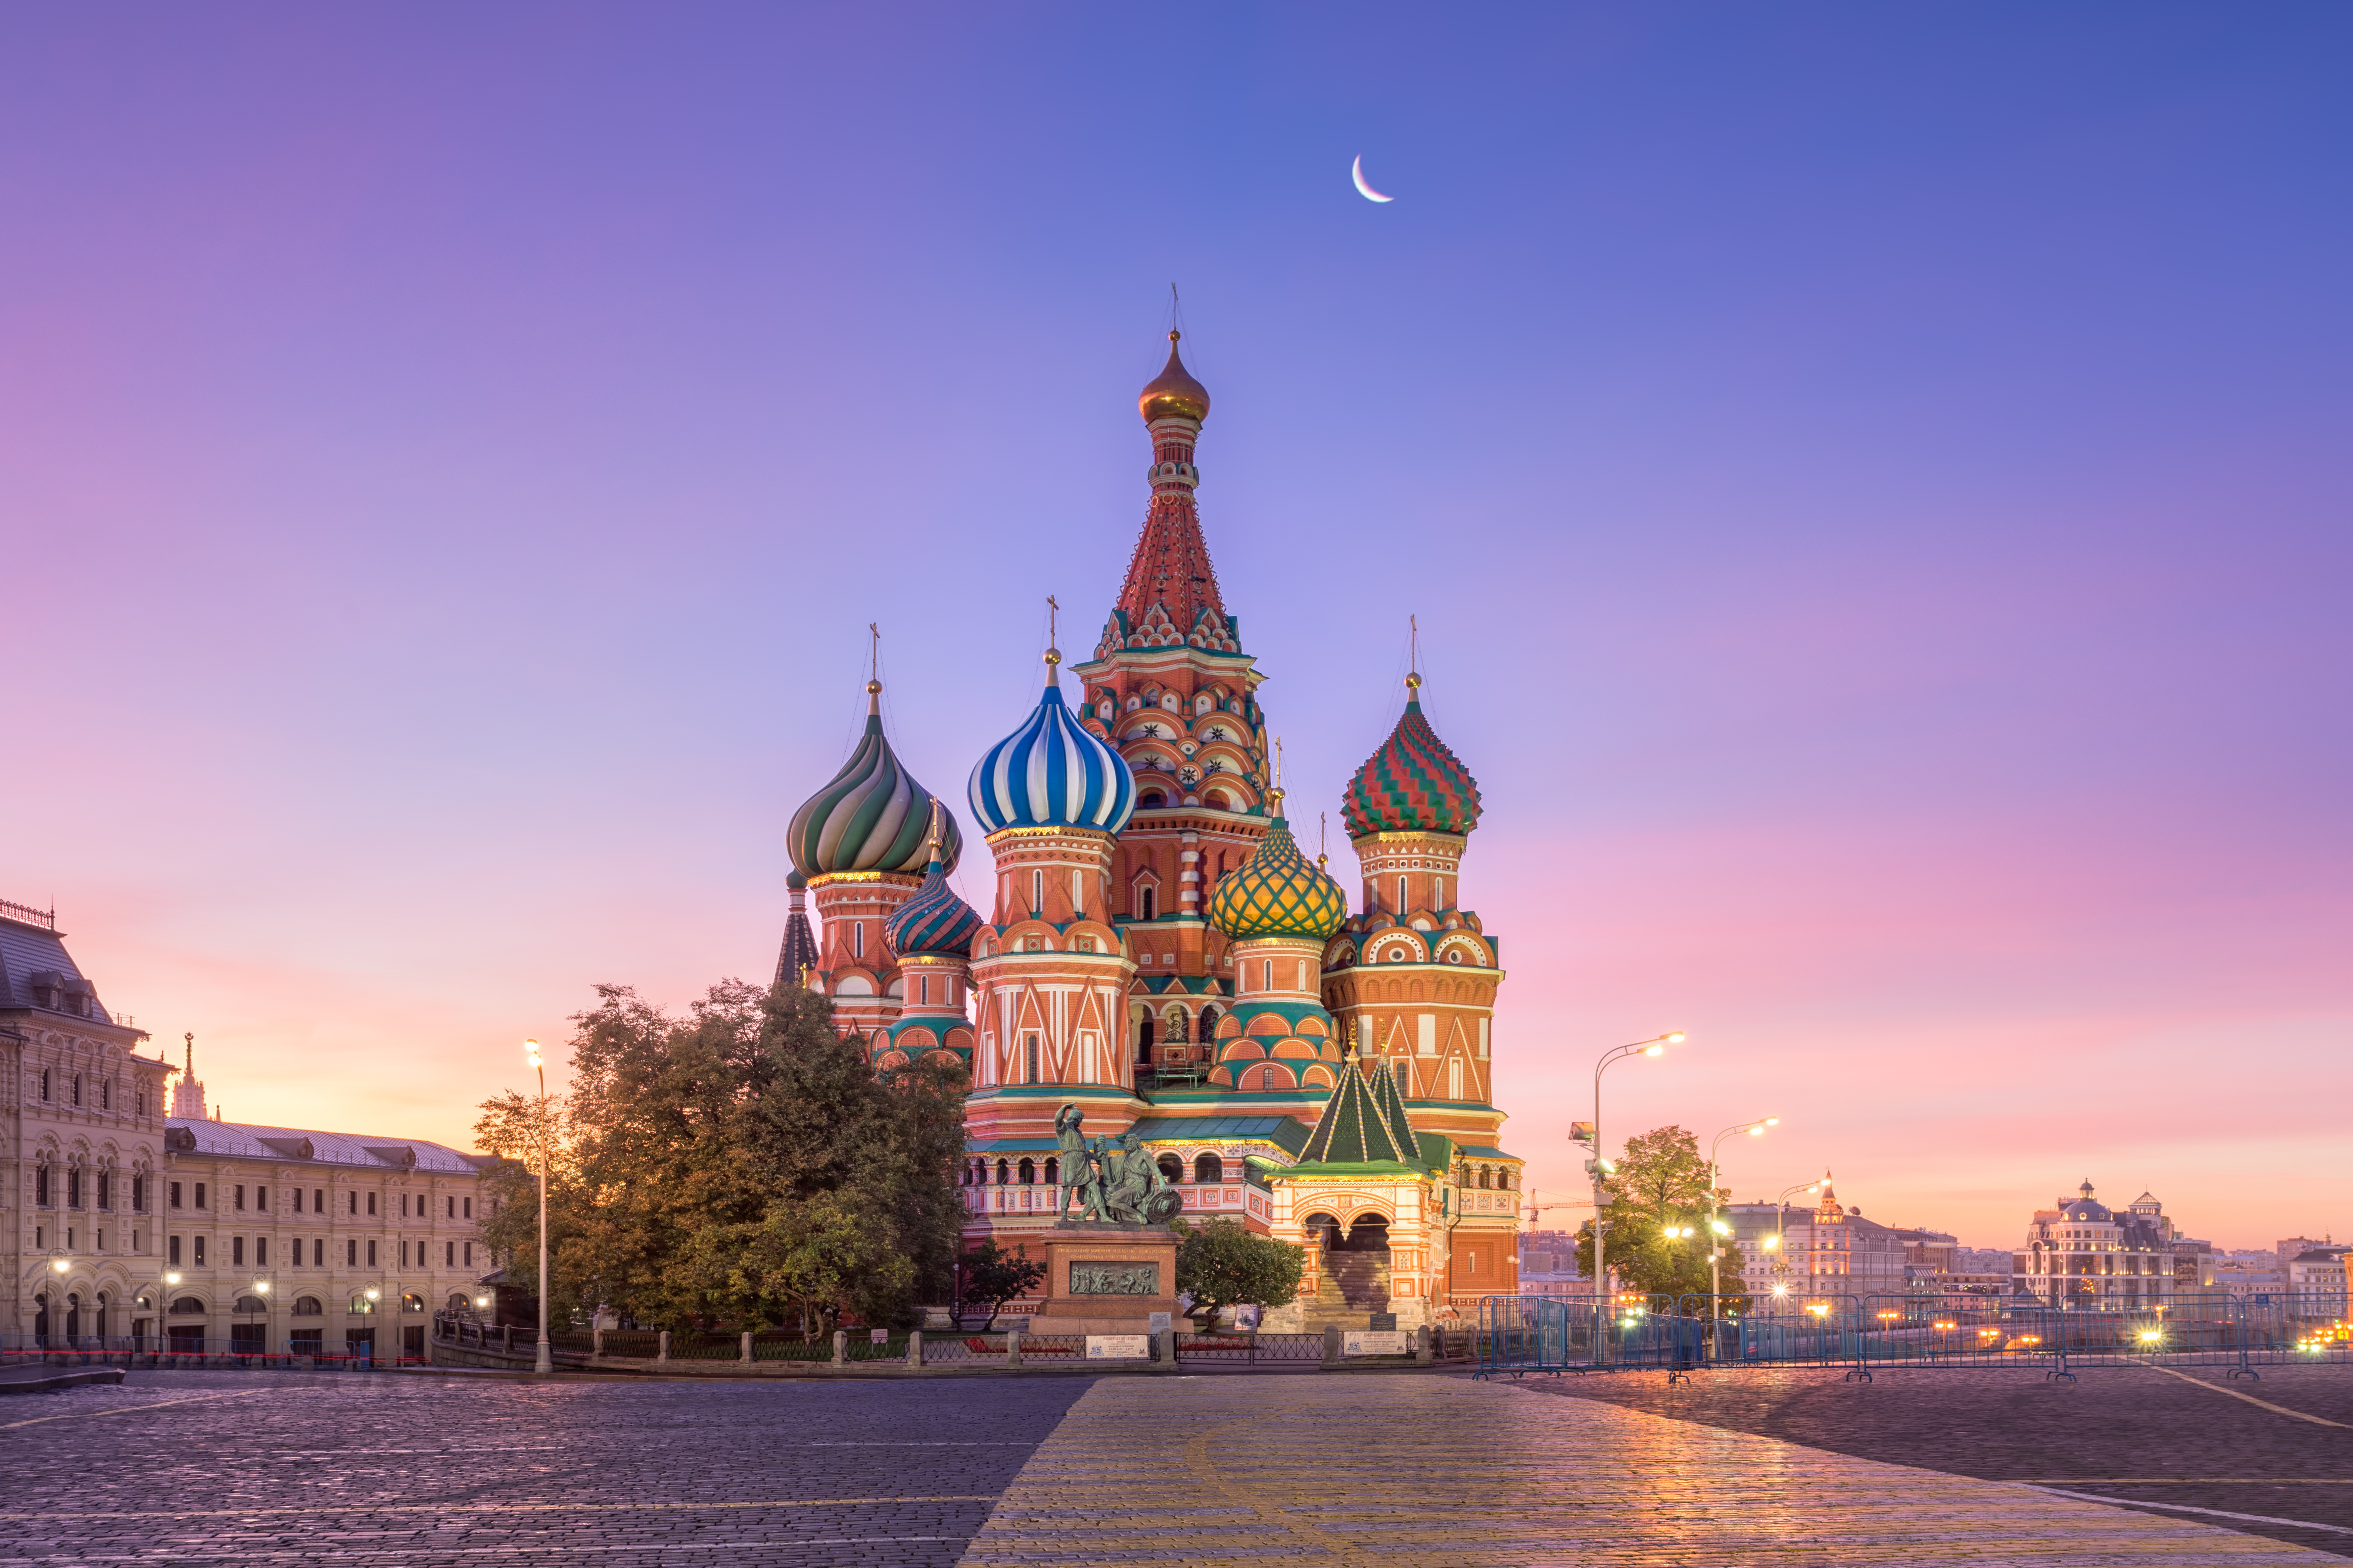 st.basil's cathedral